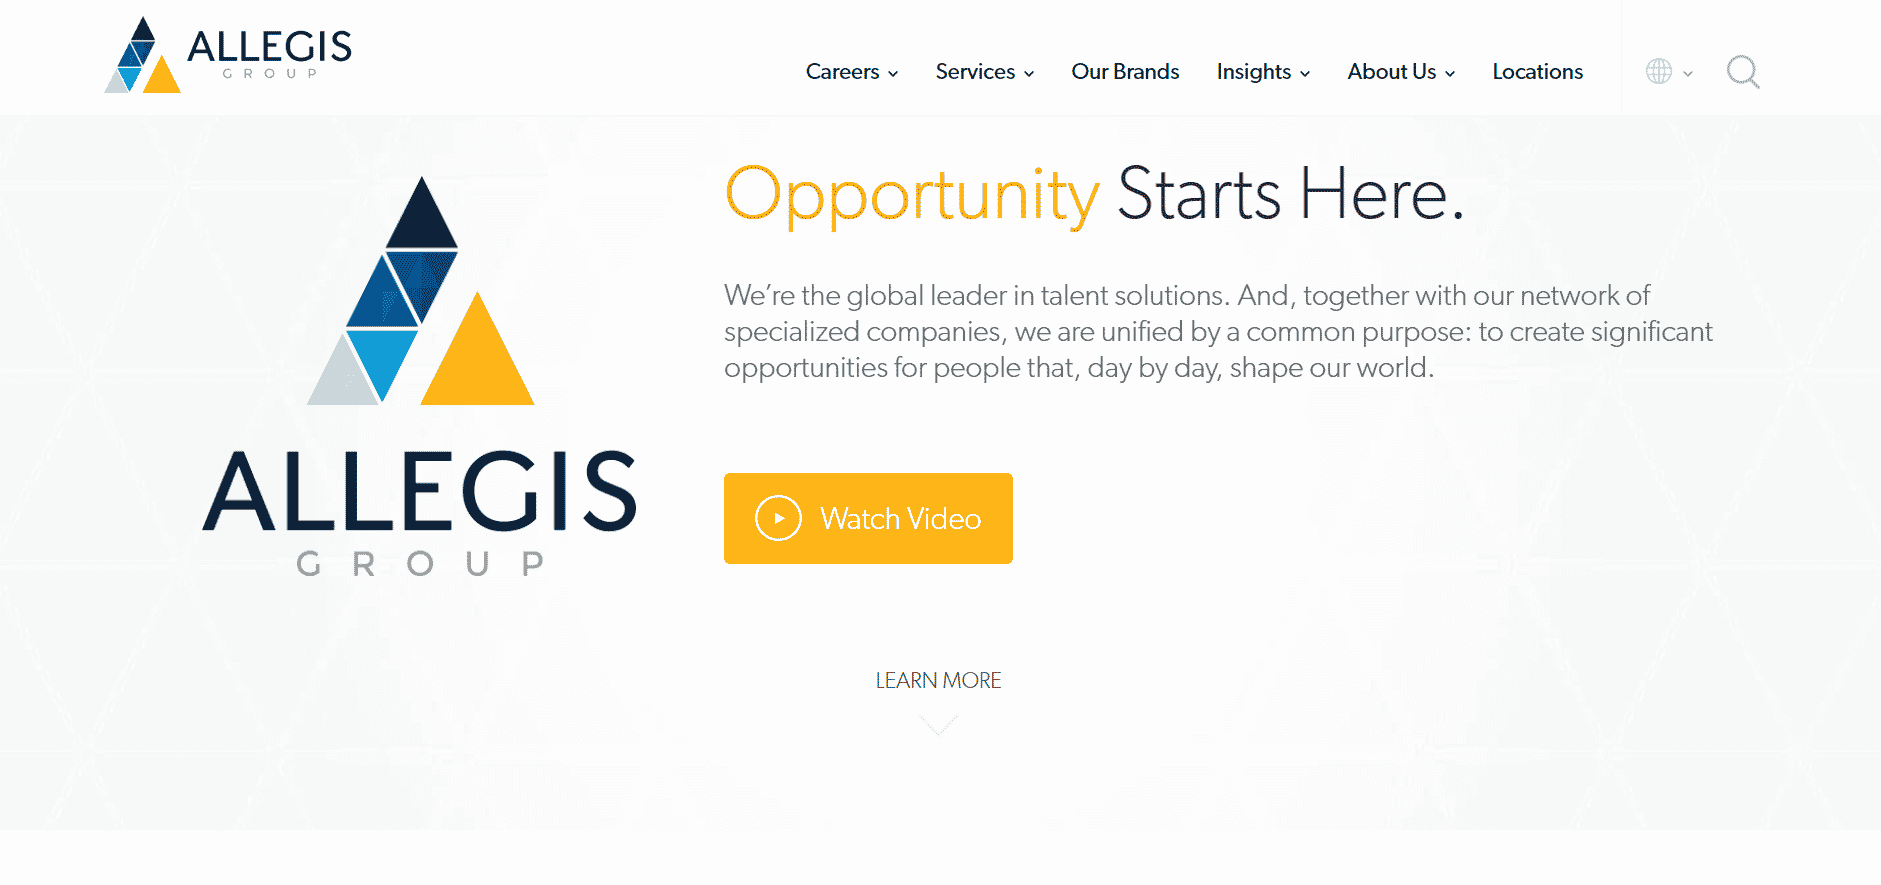 Allegis Group | Part-Time Jobs with Health Insurance Benefits